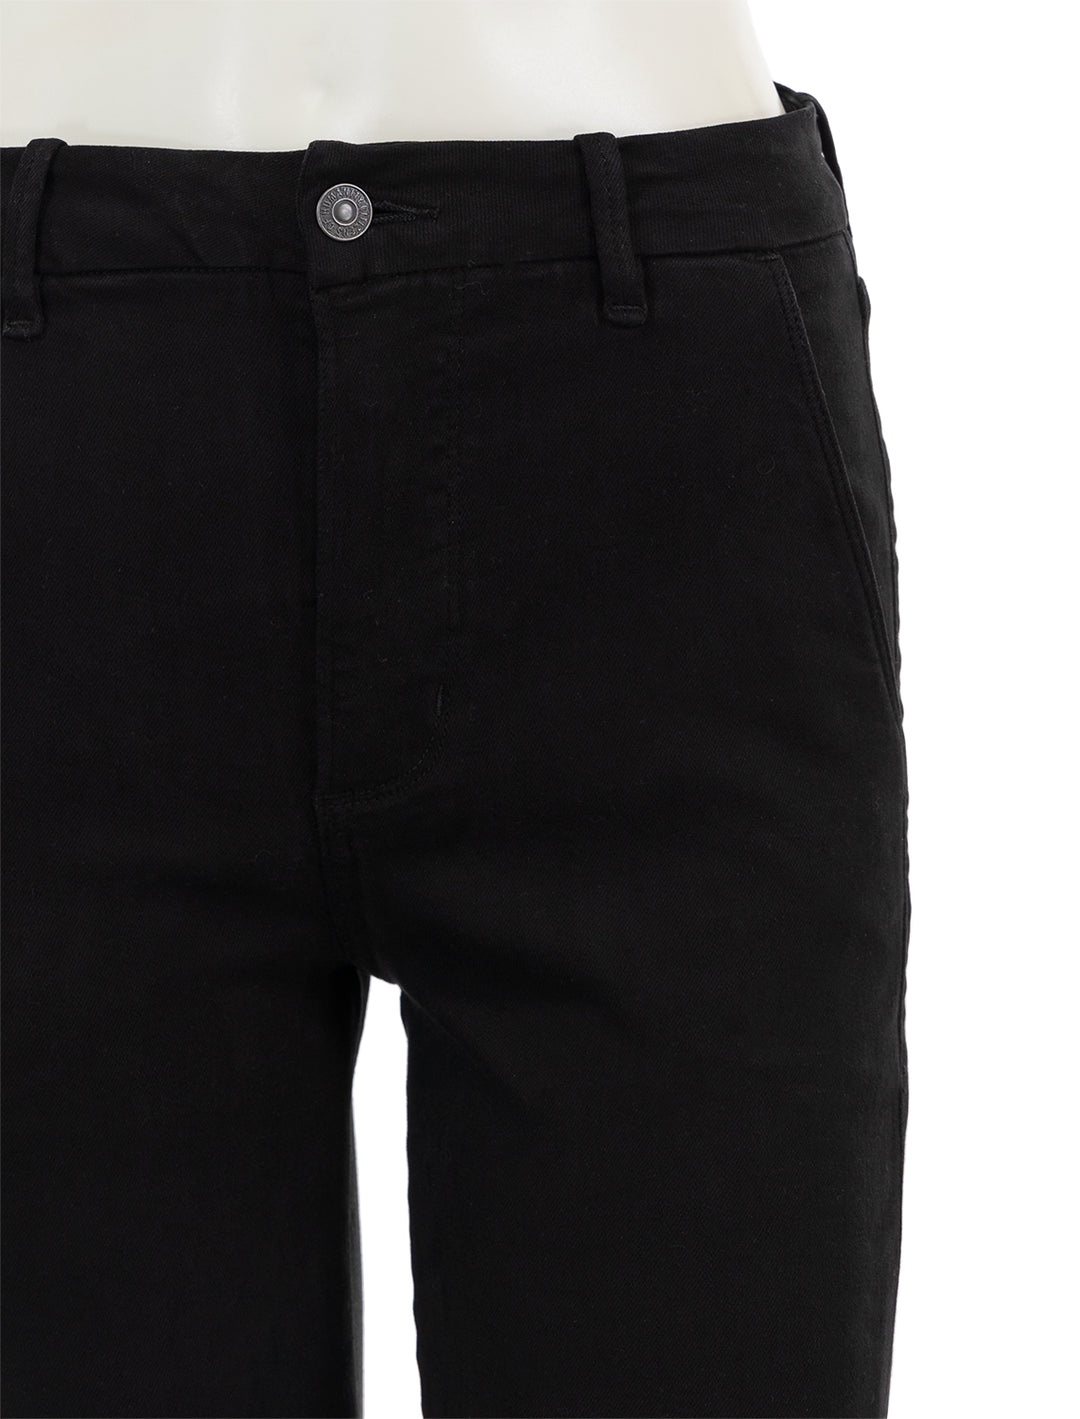 Close-up view of Citizens of Humanity's jayla split skinny in plush black.